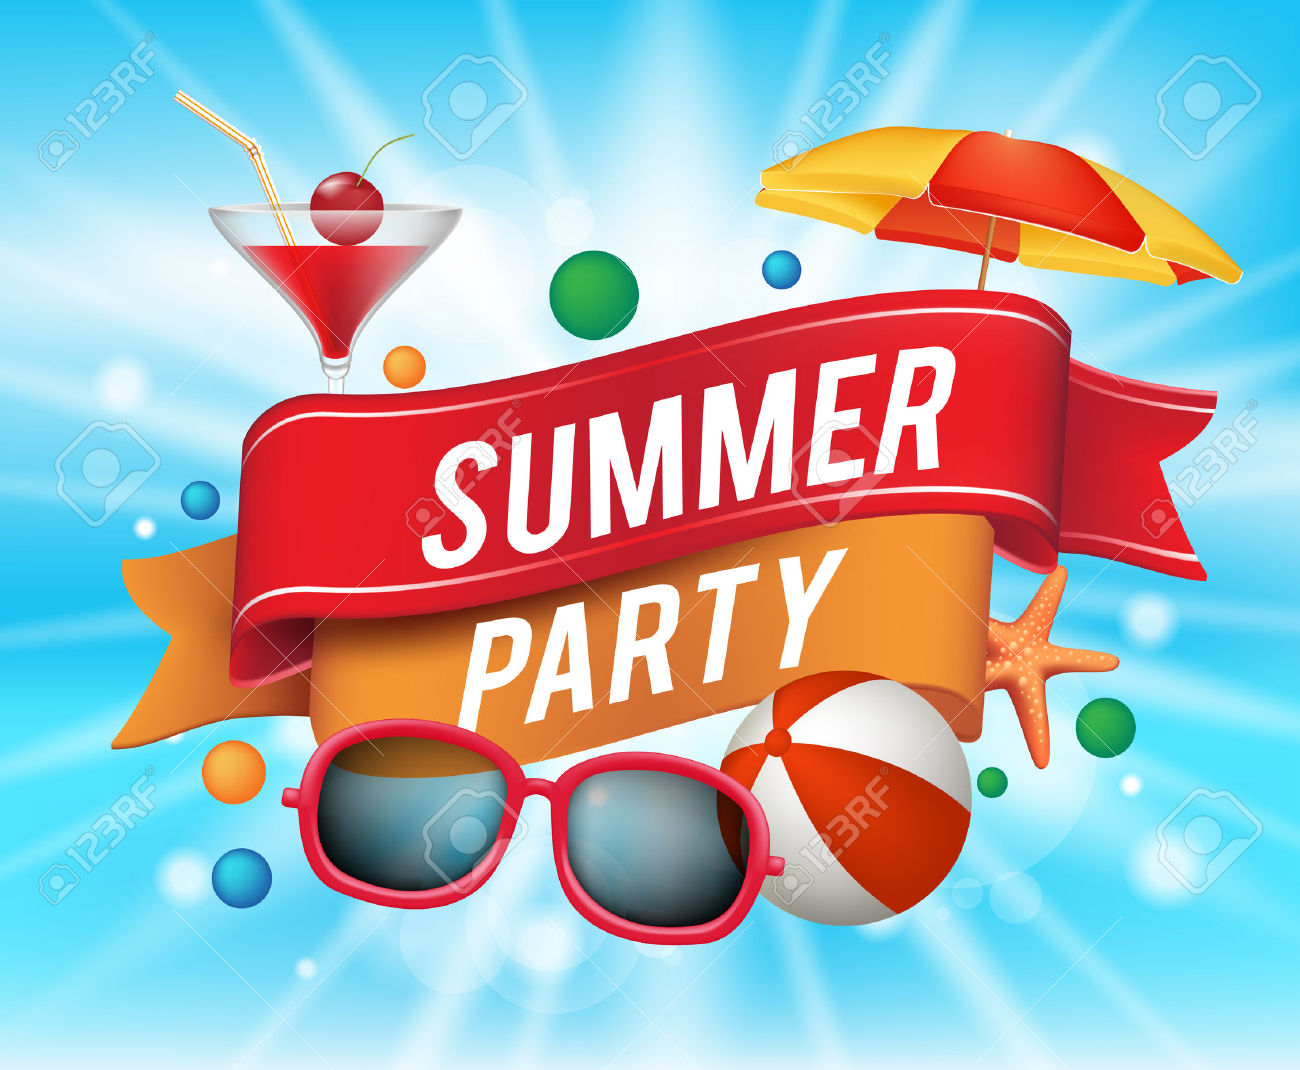 69,827 Summer Celebration Stock Illustrations, Cliparts And.